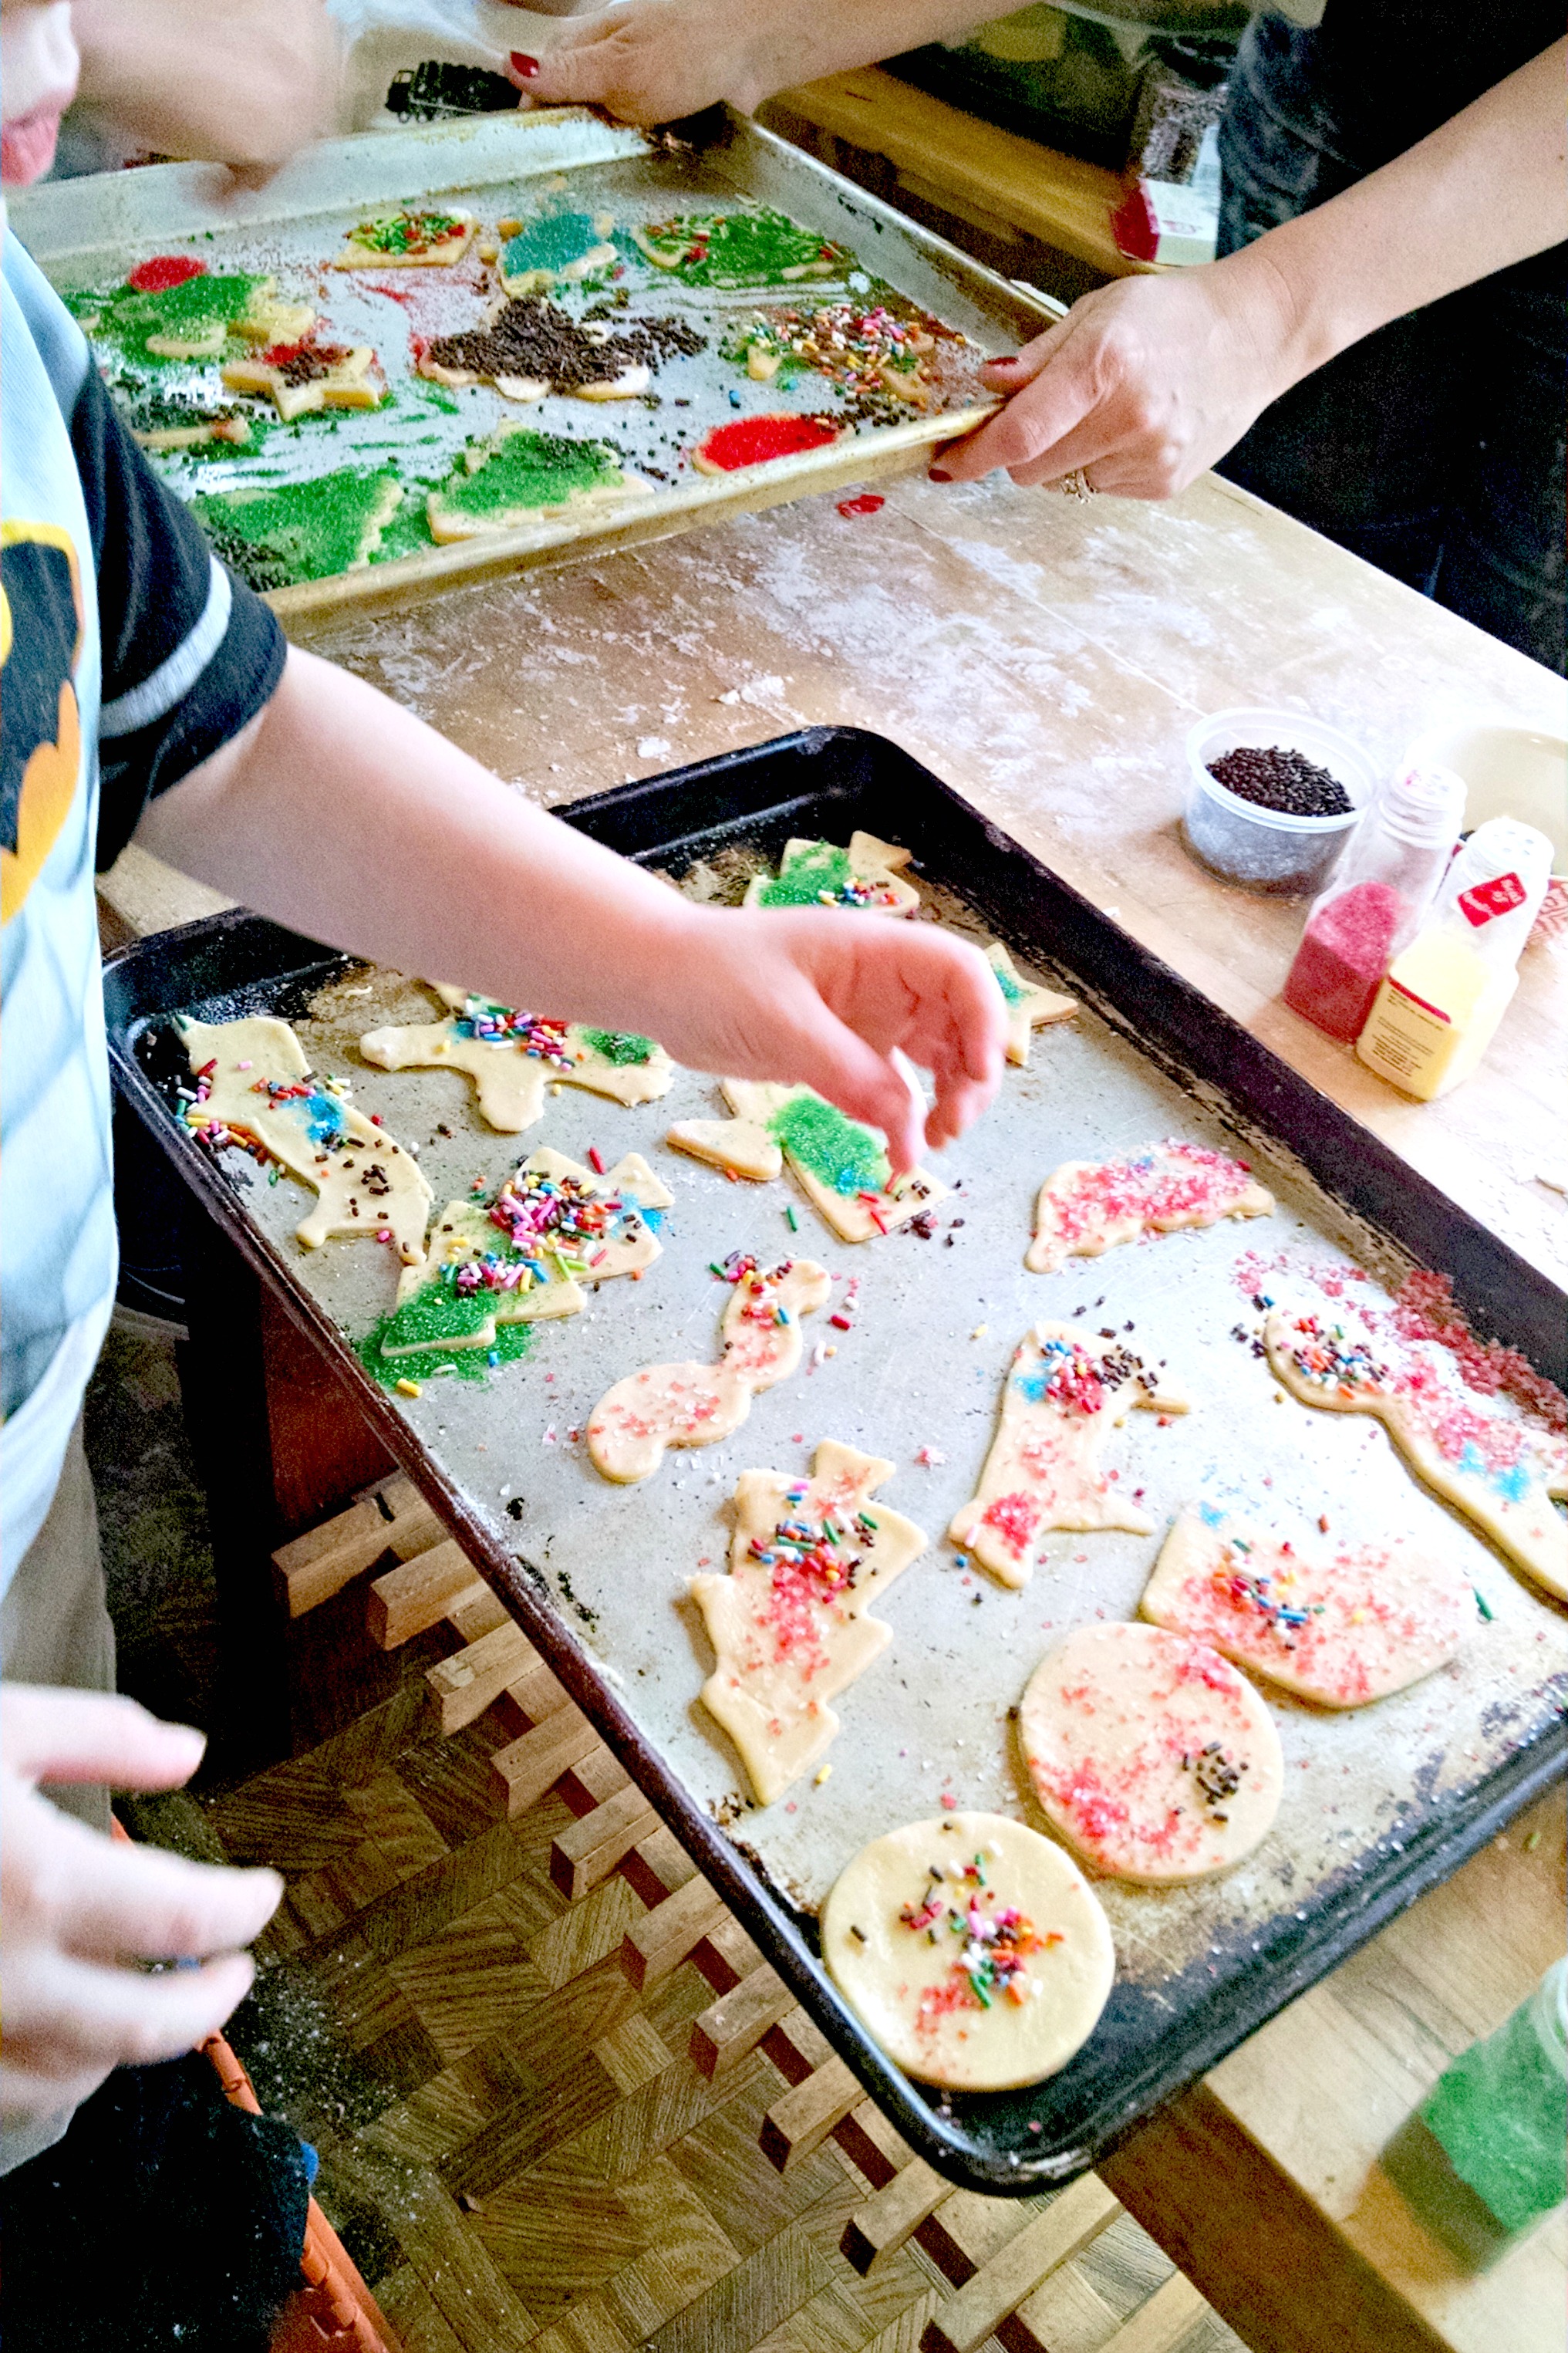 Try a new tradition this year with this sugar cookie party!